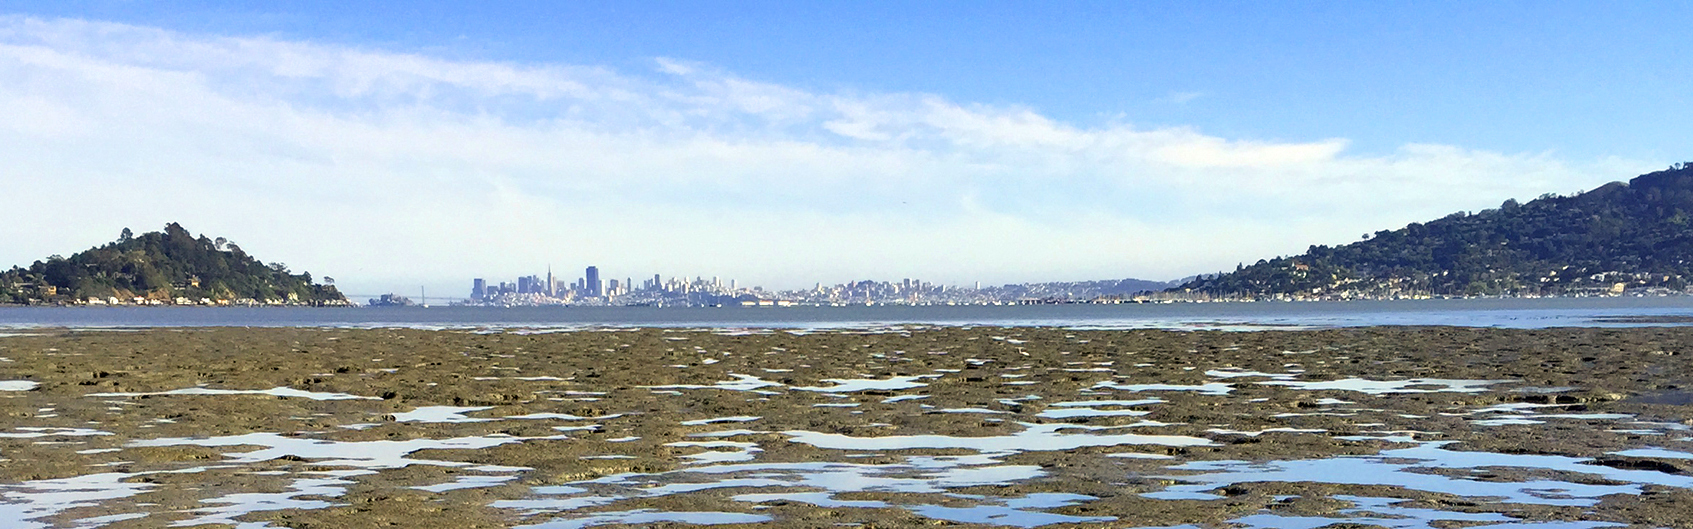 mud flat with San Francisco skyline in background